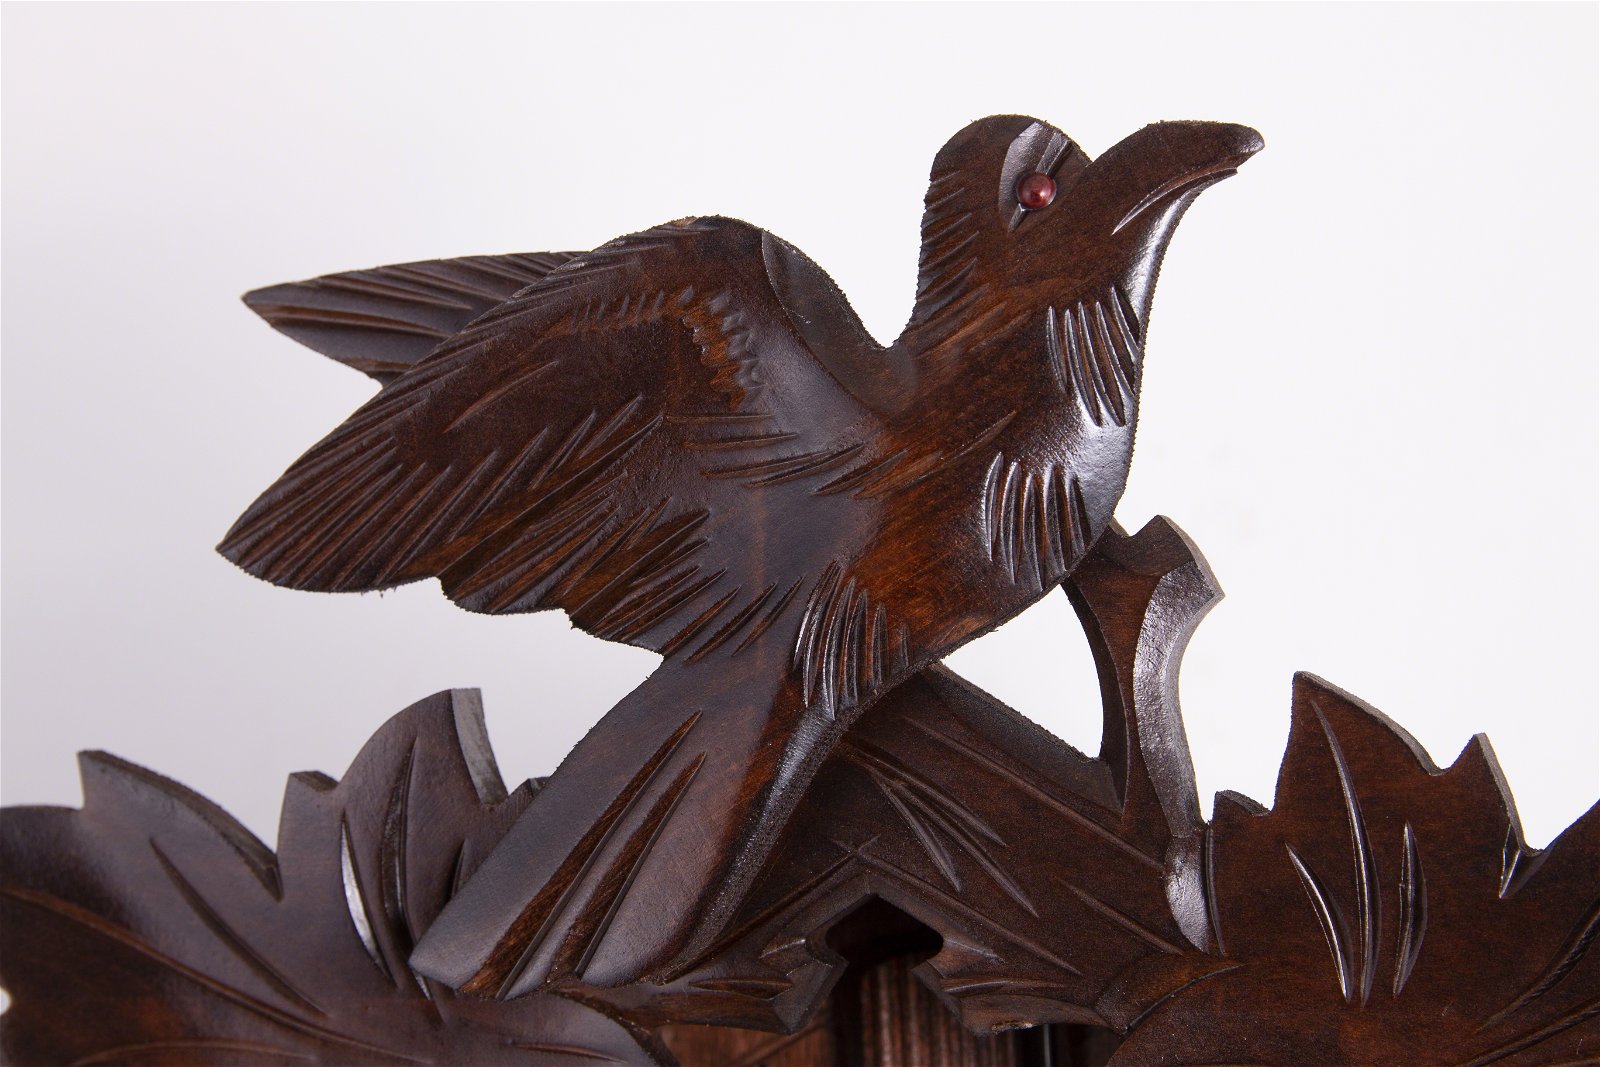 Cuckoo Clock 1-day-movement Carved-Style 36cm by Hekas